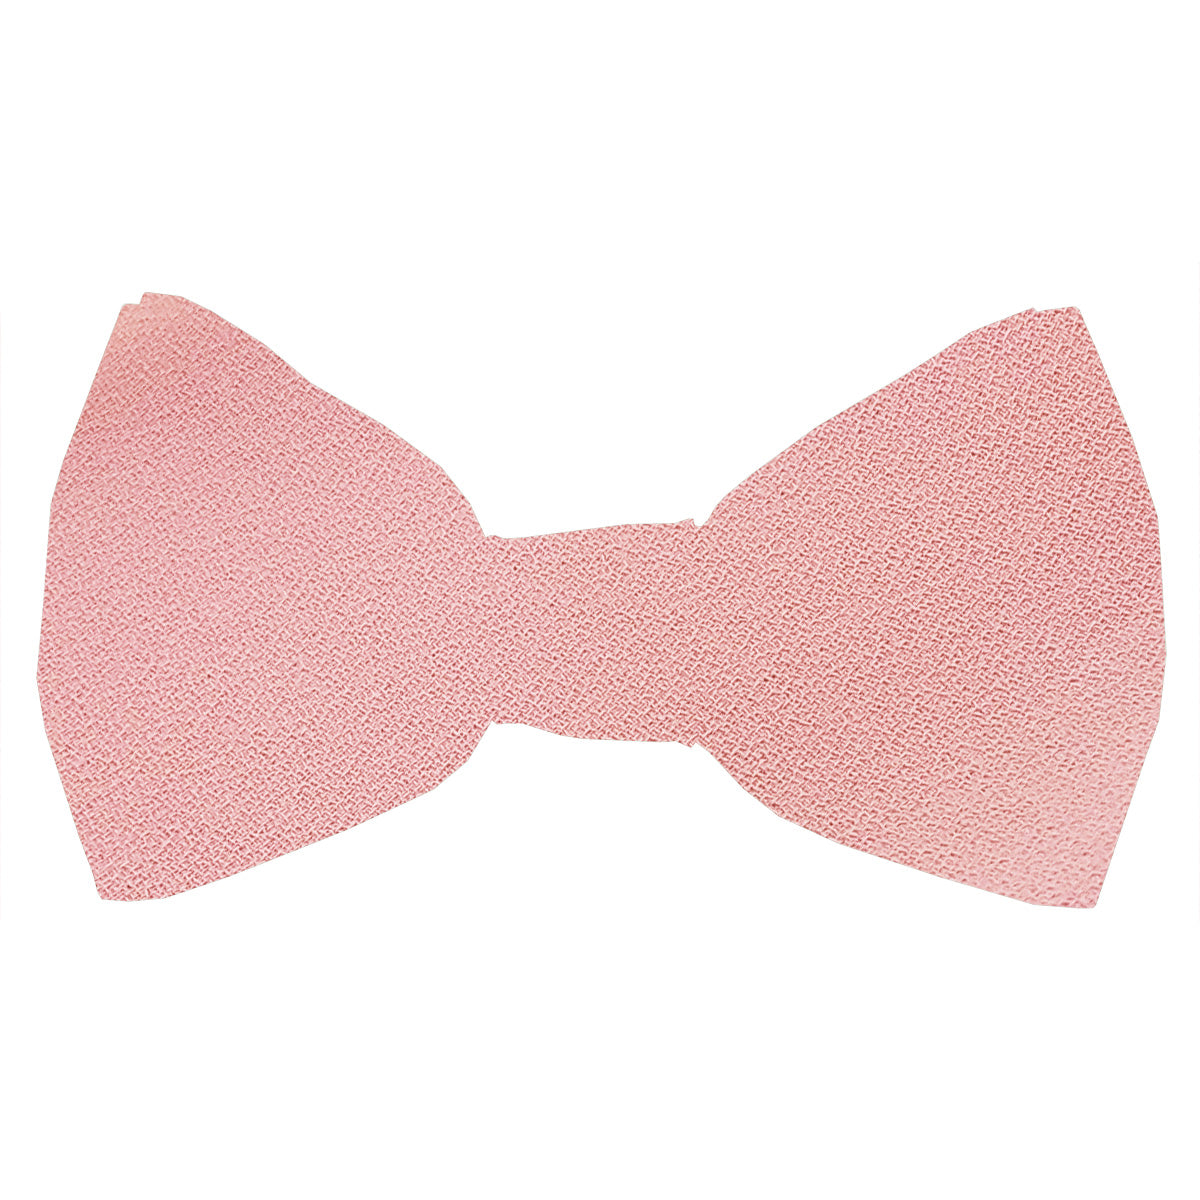 Carnation Pink Boys Bow Ties